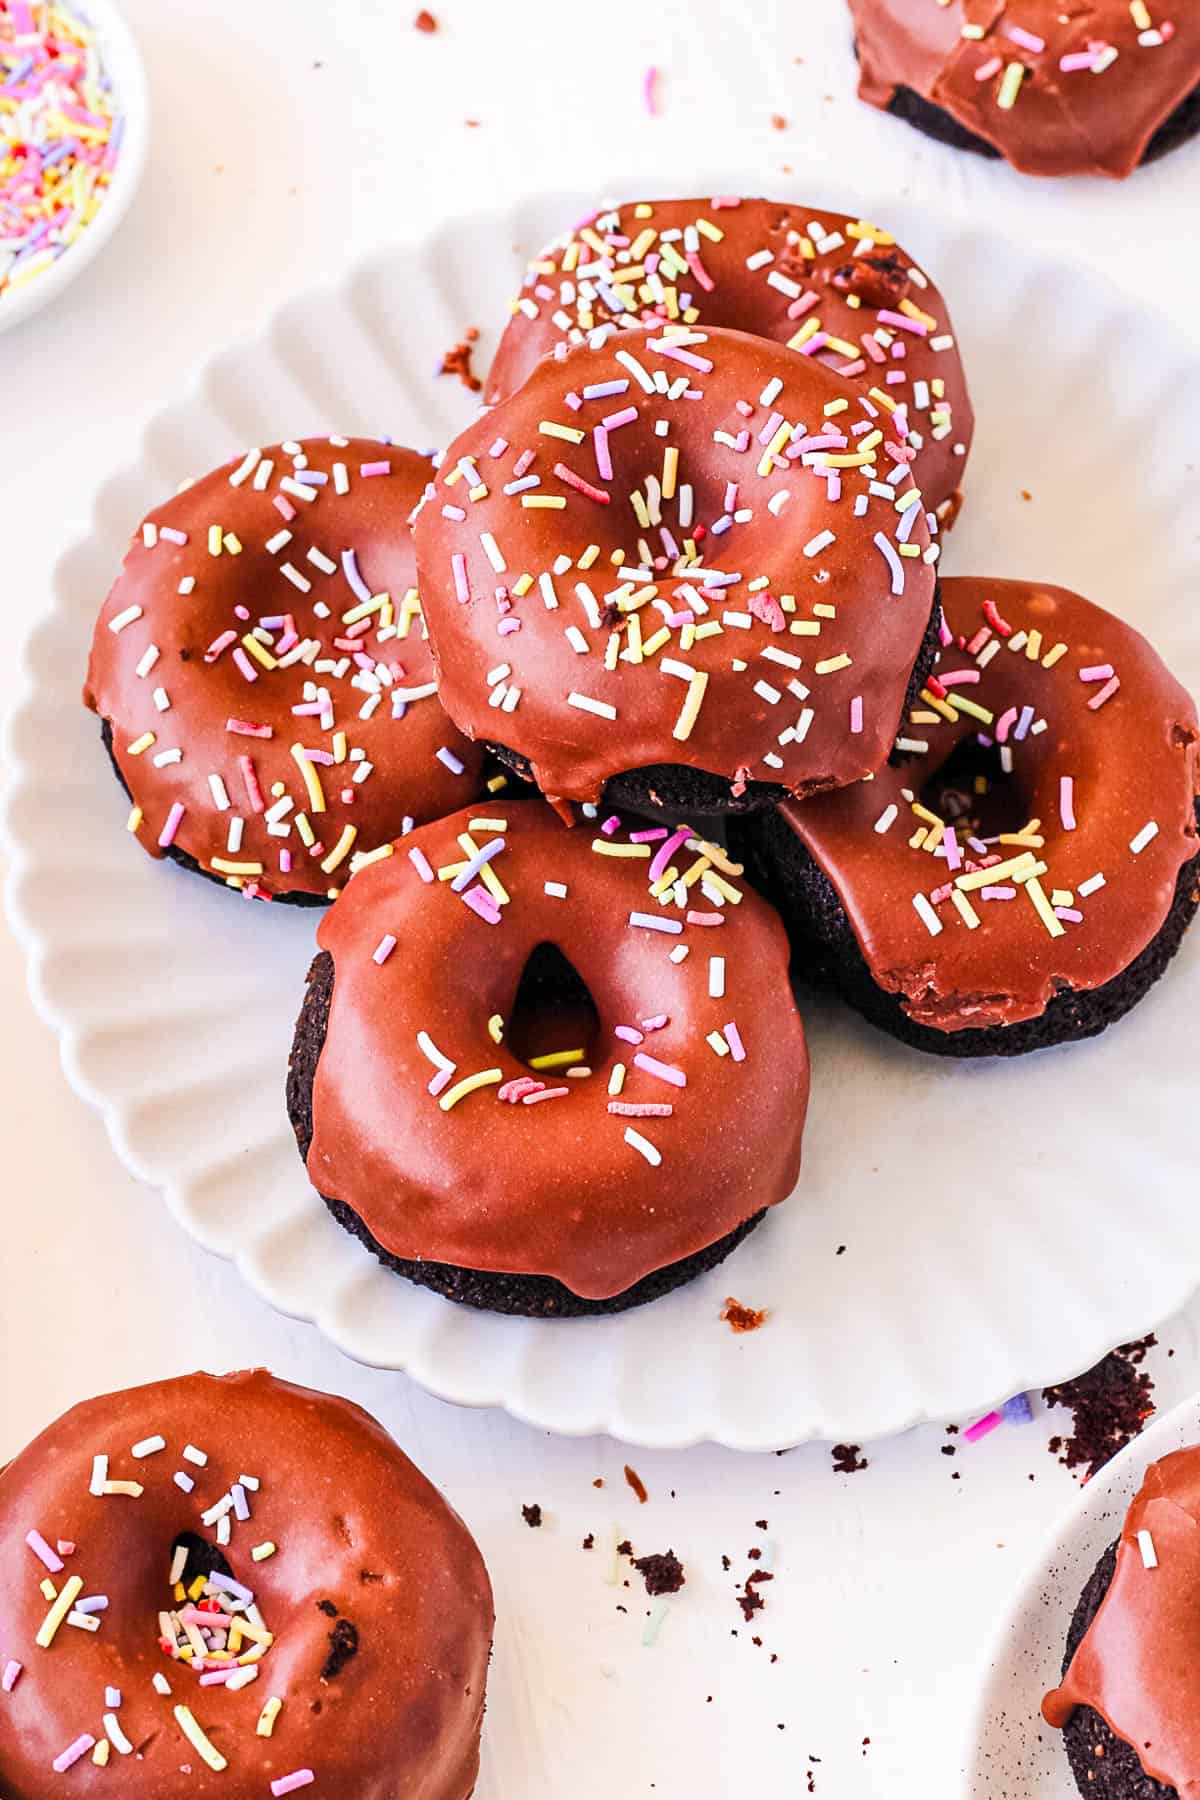 A pile of chocolate donuts served on a white plate.